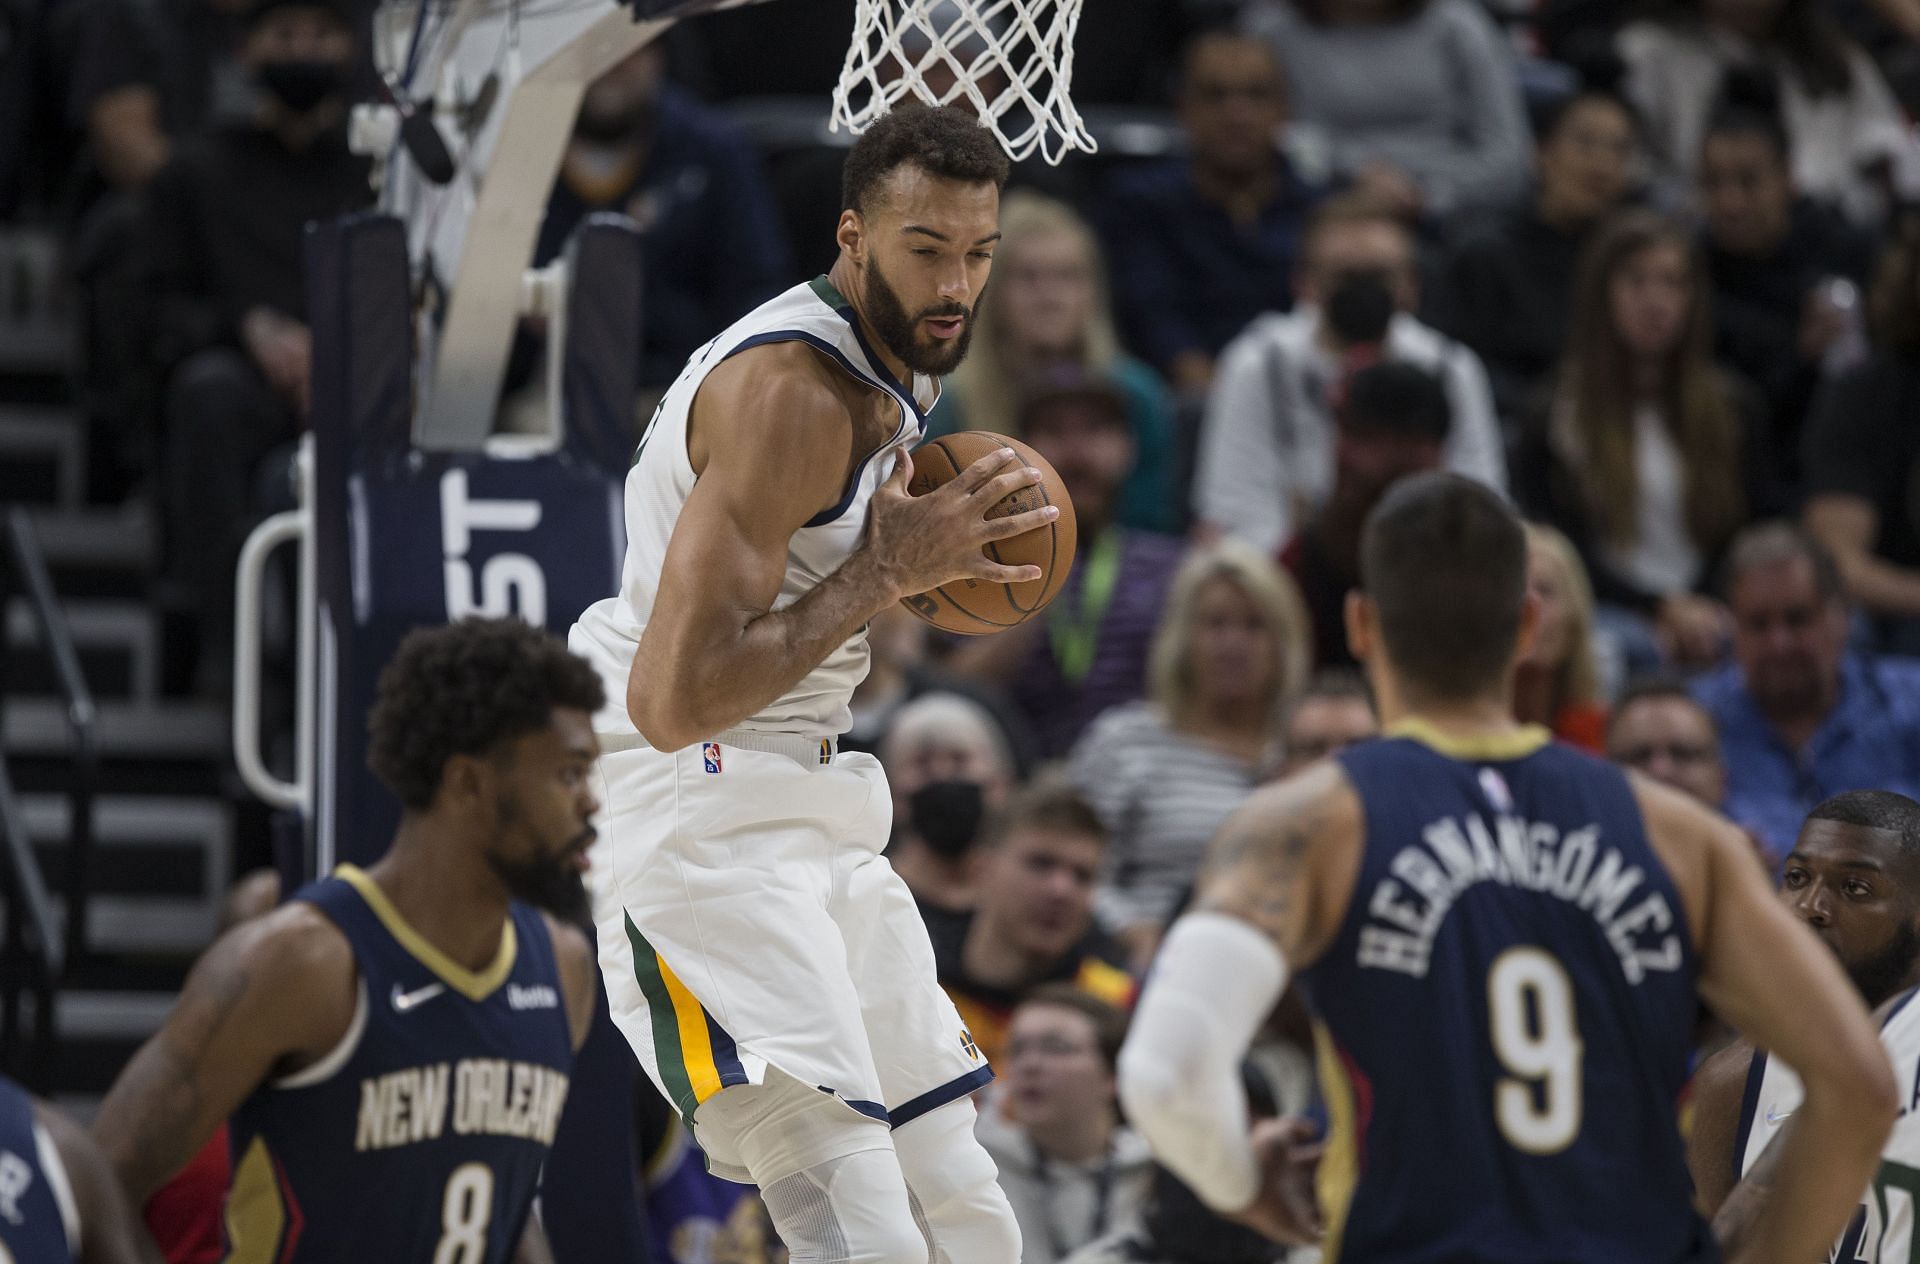 Rudy Gobert #27 of the Utah Jazz grabs a rebound during the first half of their game against the New Orleans Pelicans on October 11, 2021 at the Vivint Smart Home Arena in Salt Lake City, Utah.